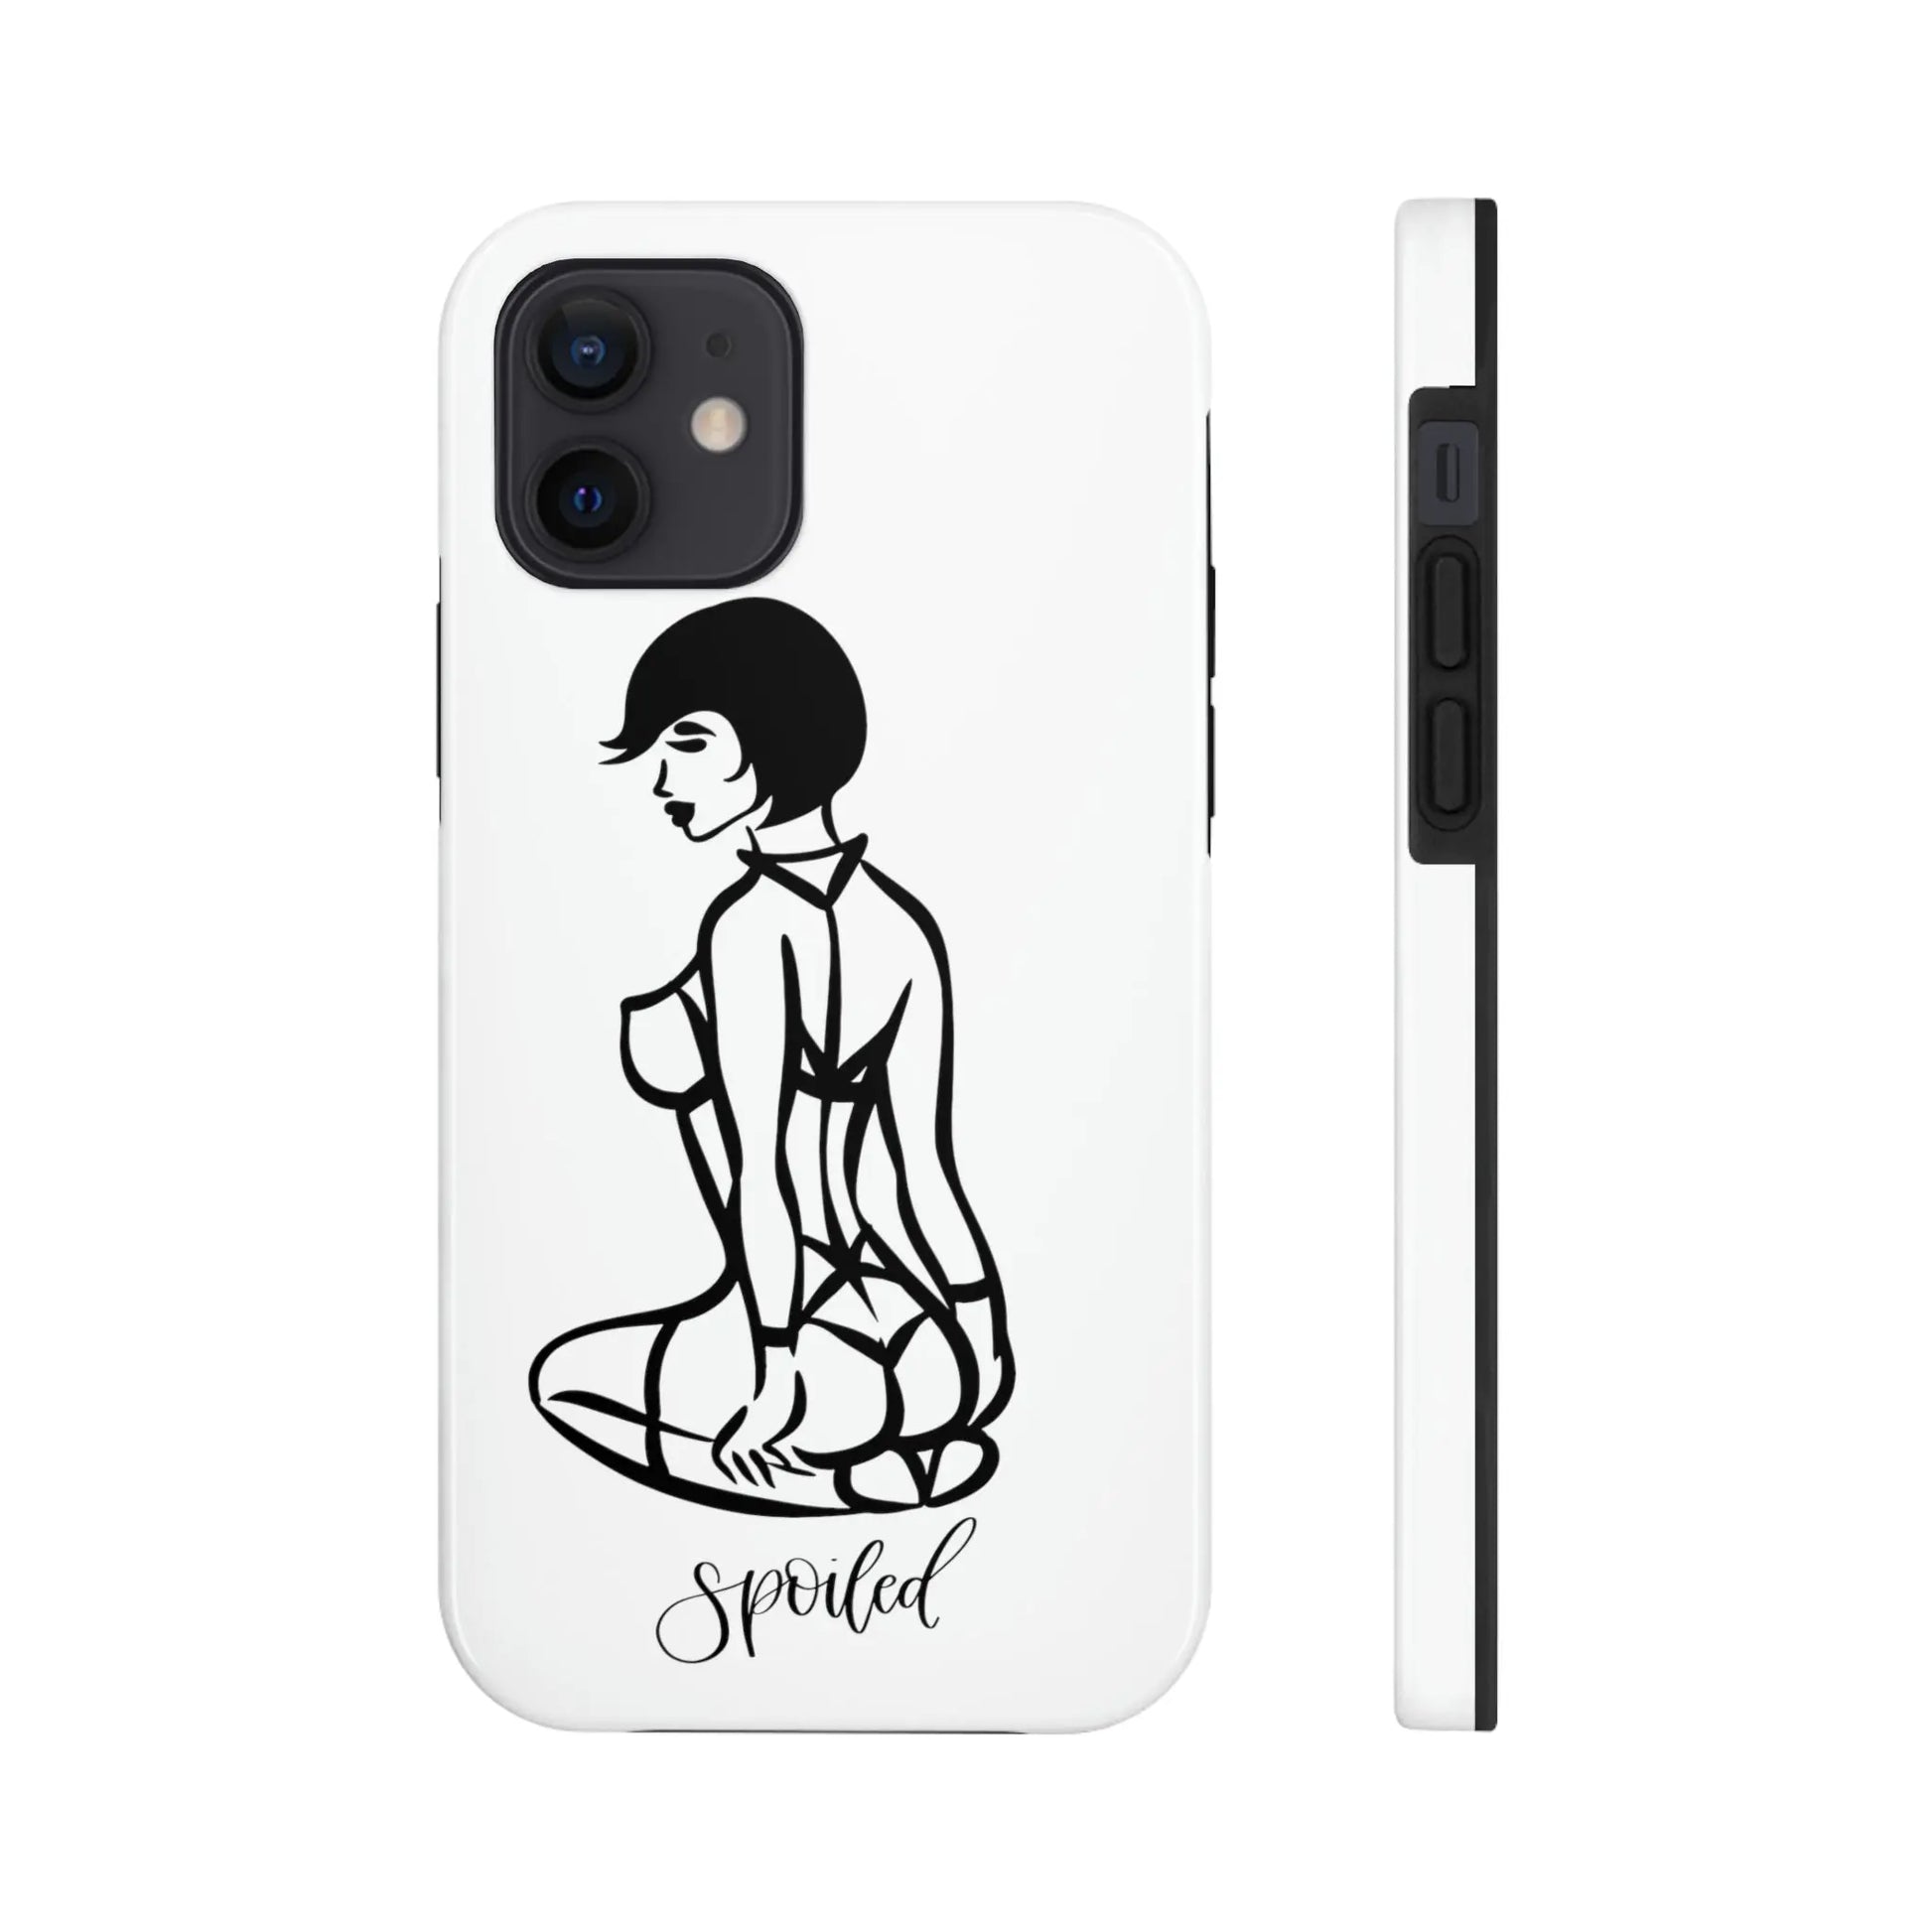 Spoiled & Bound Tough Phone Case iPhone 12